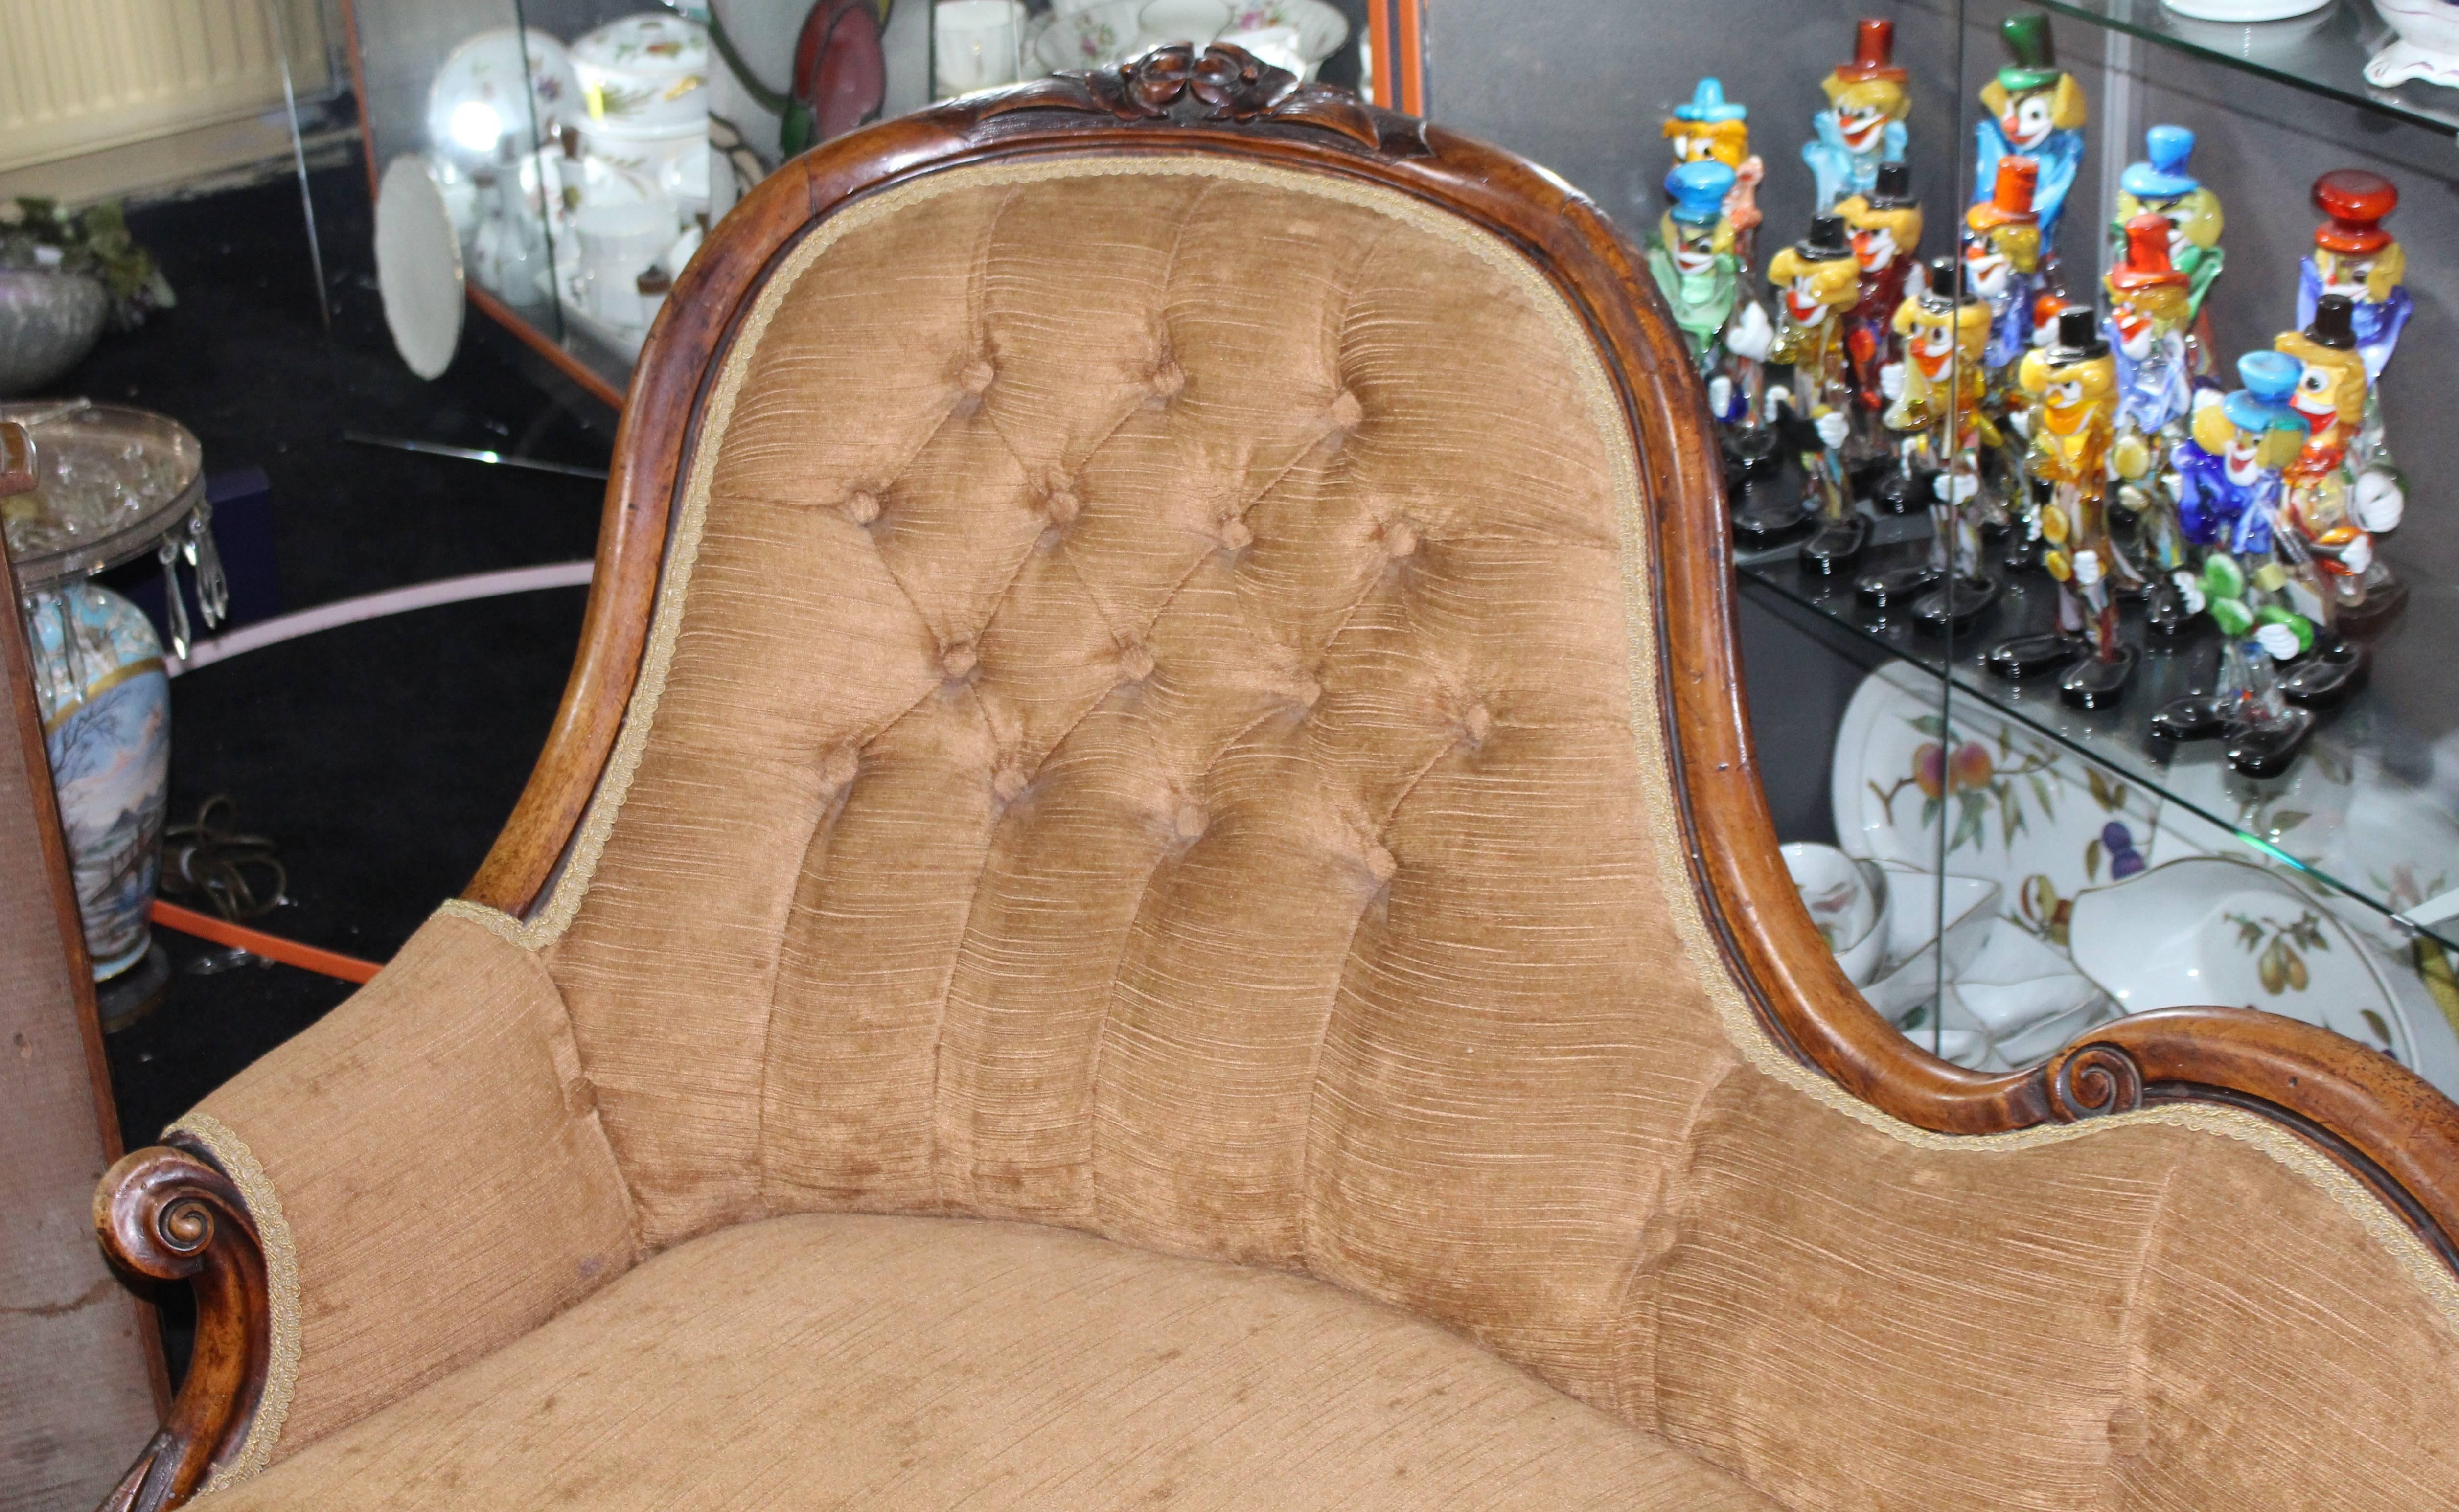 Measures: Length 166 cm 65 1/2 in.
Width 90 cm 35 1/2 in.
Height 86 cm 34 in.

Period 19th century.
Frame walnut.
Upholstery upholstered approximately 12 months ago in an antique style gold chenille fabric, button-back. 
Condition Very good